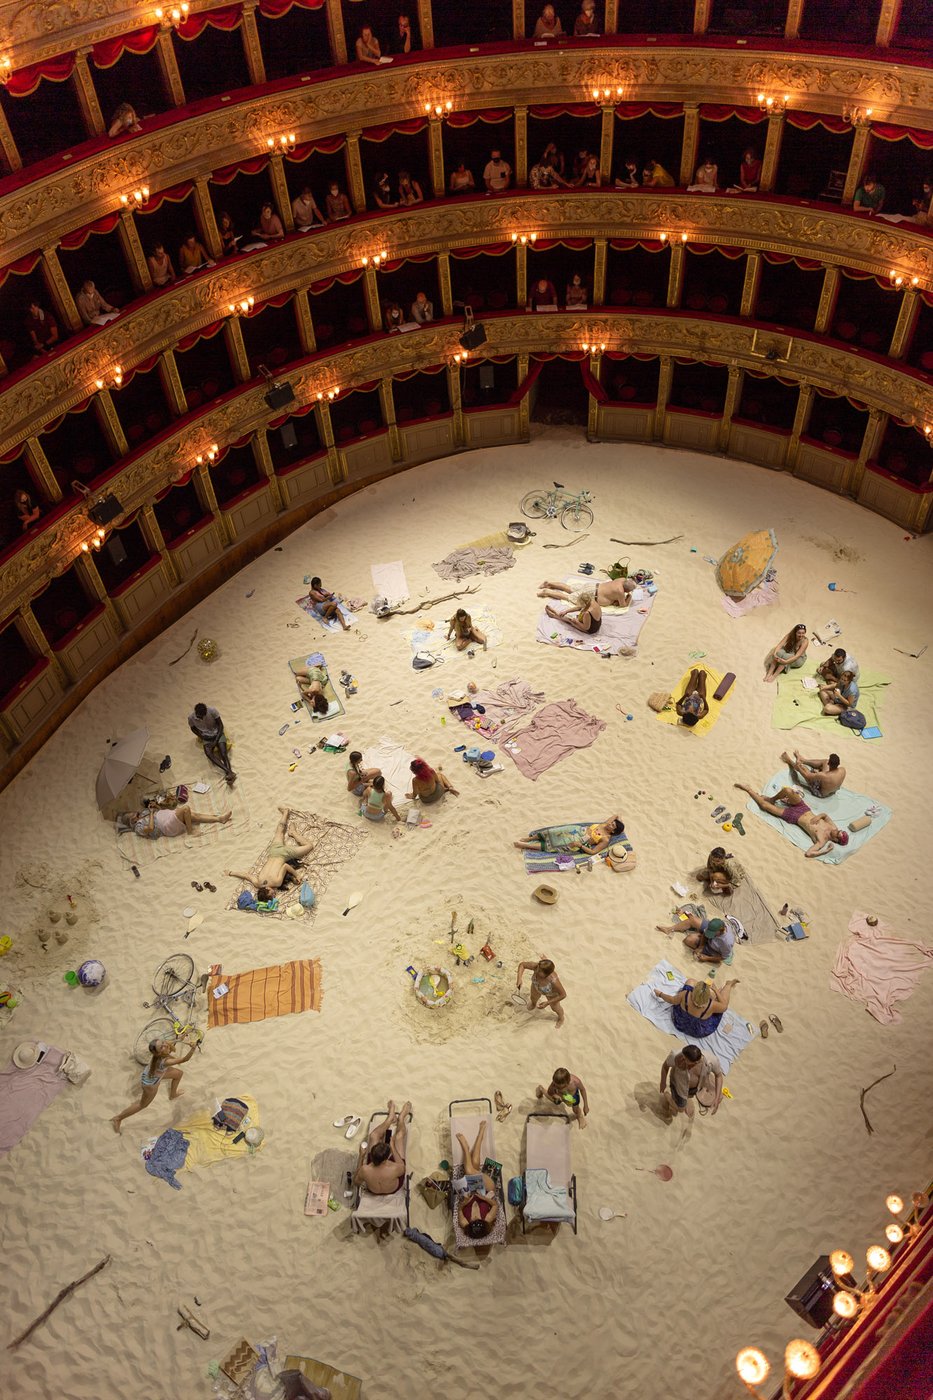 Interior of a theatre, audience looks down at people sitting in the sand.